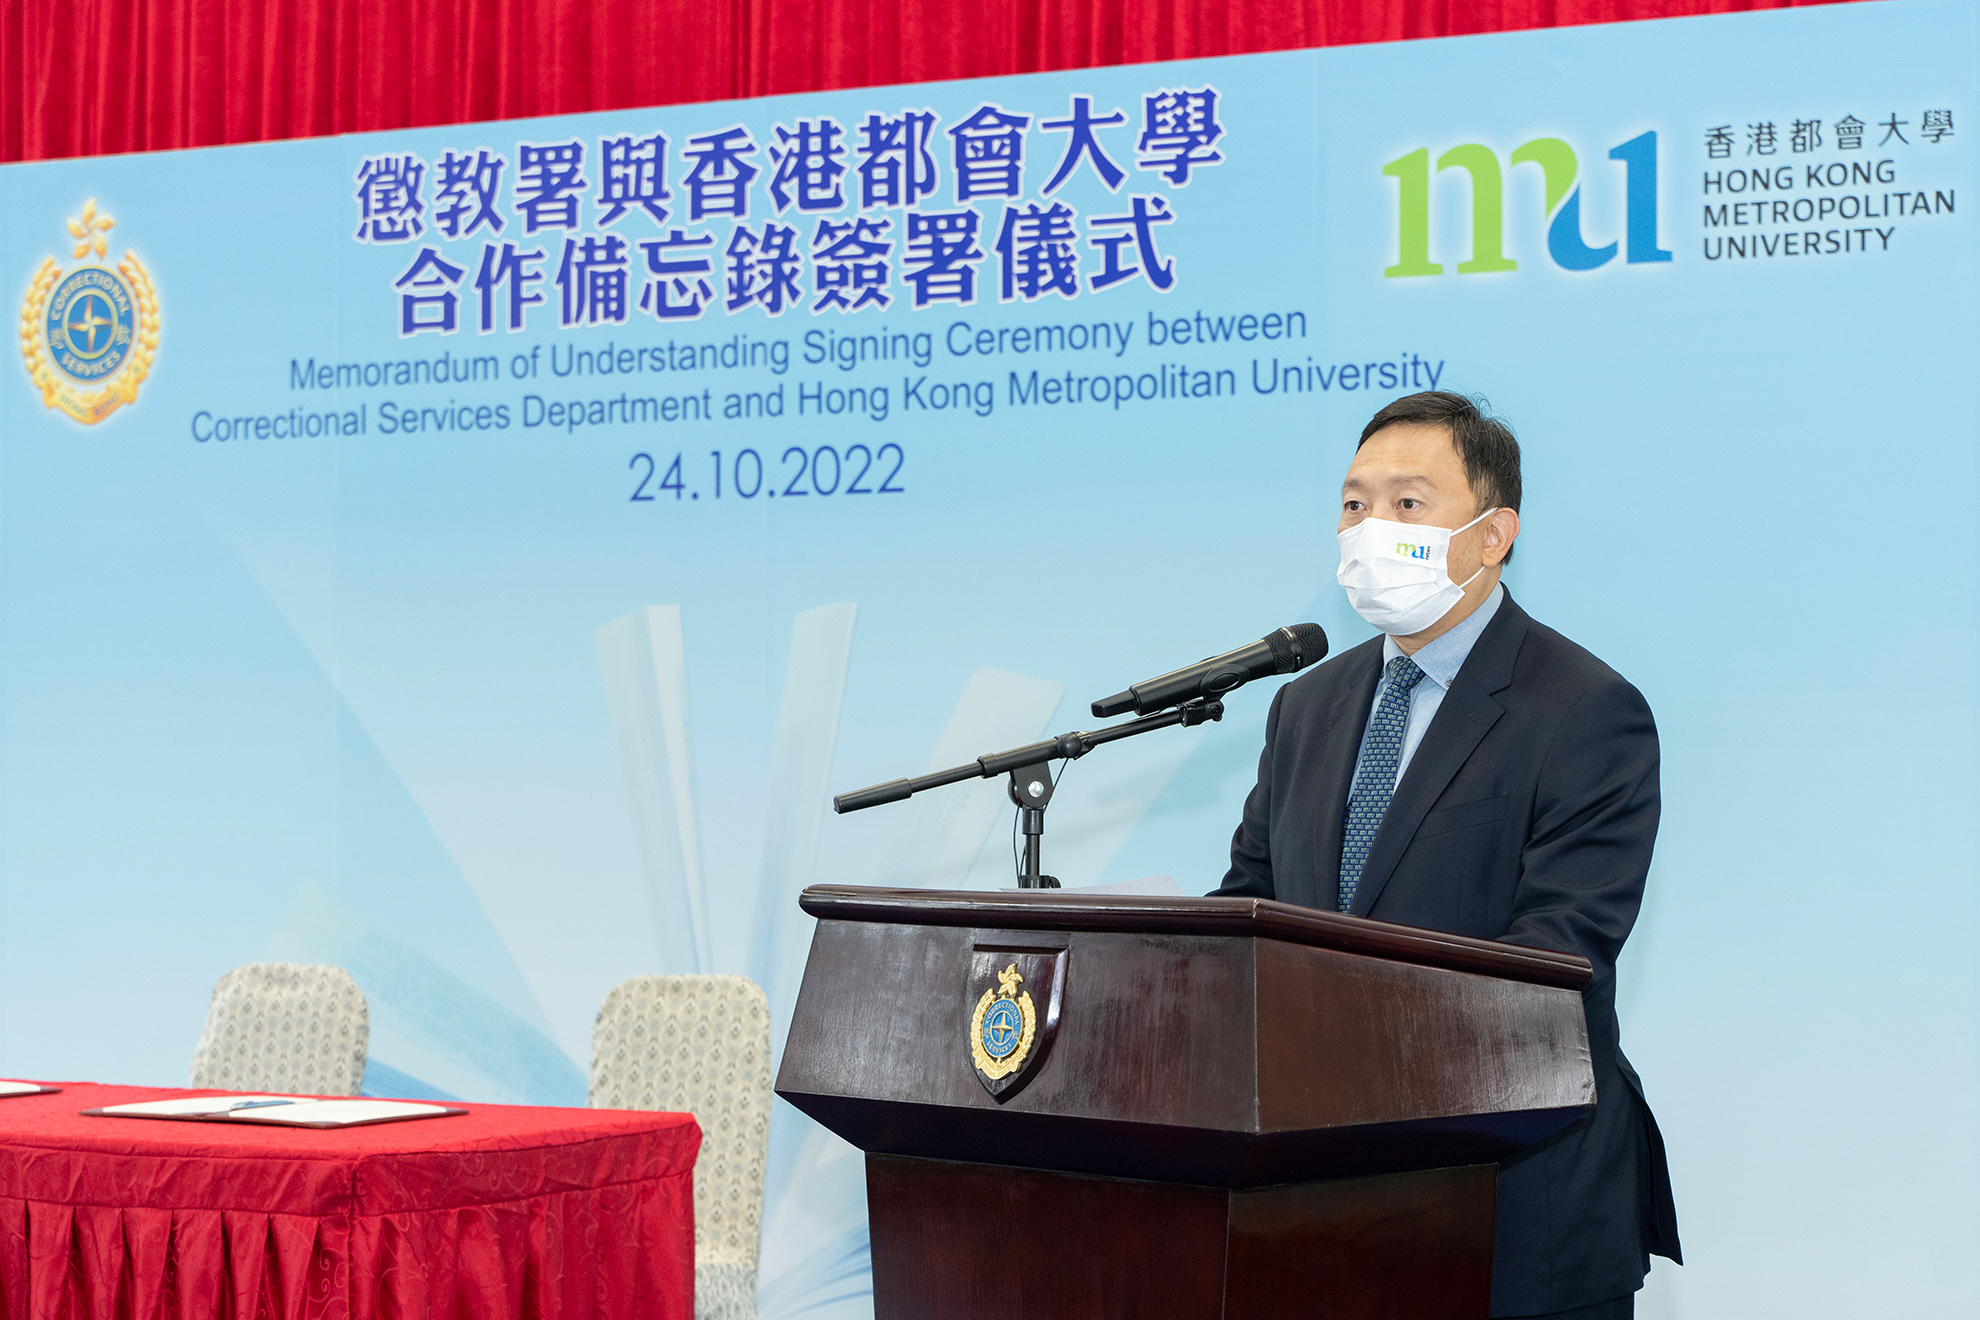 The Correctional Services Department (CSD) and Hong Kong Metropolitan University (HKMU) today (24 October) signed a Memorandum of Understanding (MoU) to strengthen learning support for persons in custody. Photo shows HKMU Council Chairman Ir Dr Conrad Wong Tin-cheung delivering a speech at the signing ceremony.